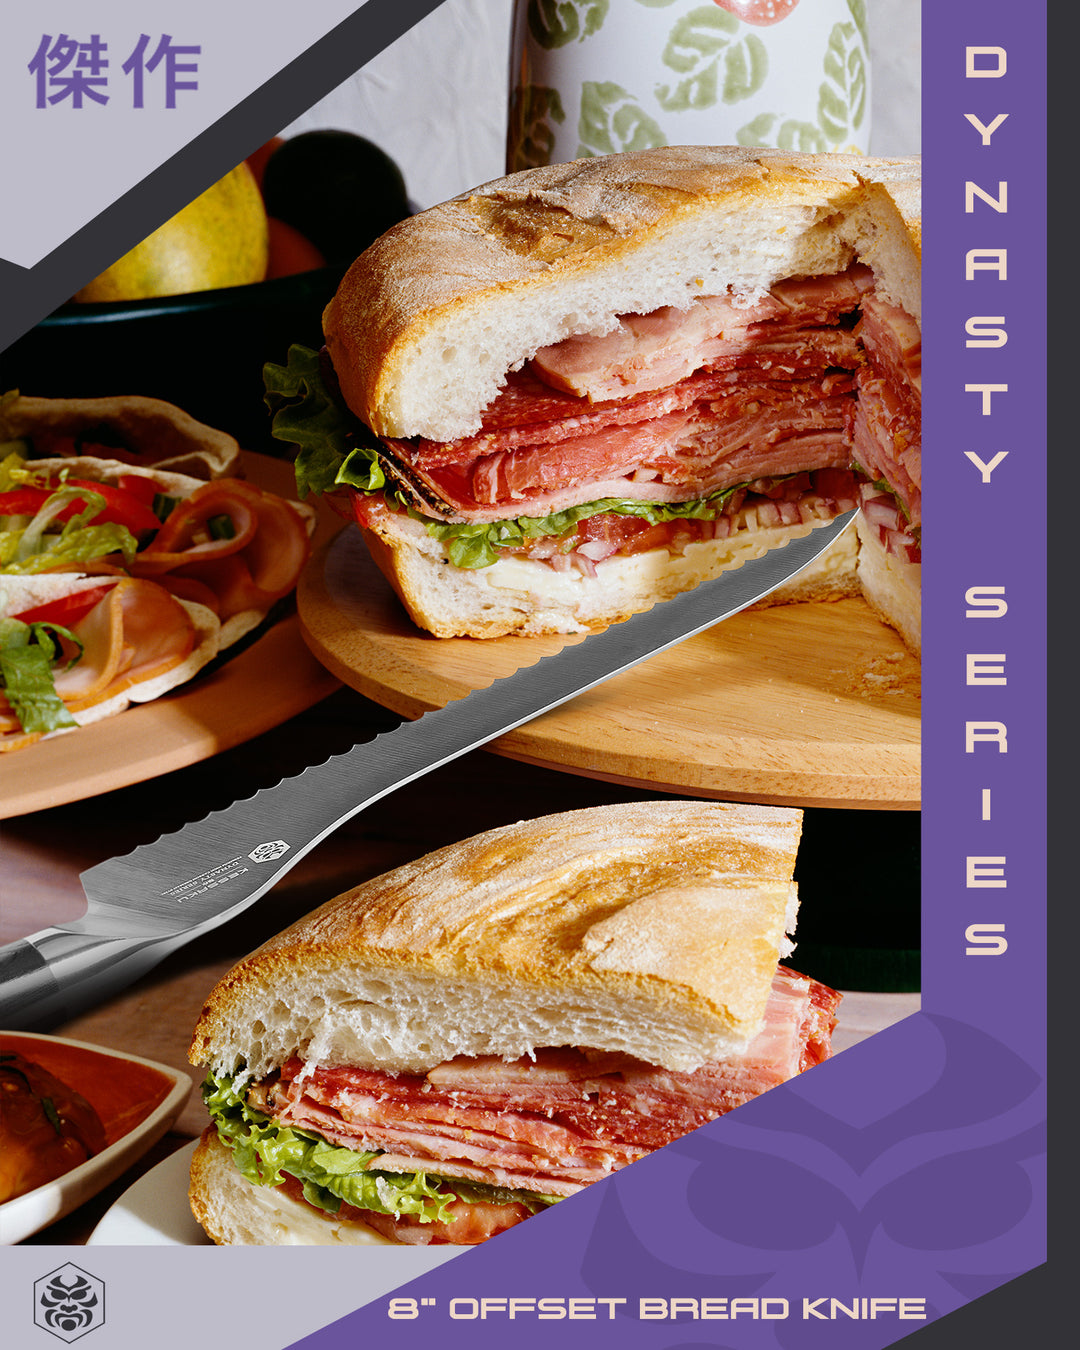 The Dynasty Offset Deli Knife having cut a piece off a huge sandwich filled with various cured meats and turkey, lettuce, tomato, and onion.